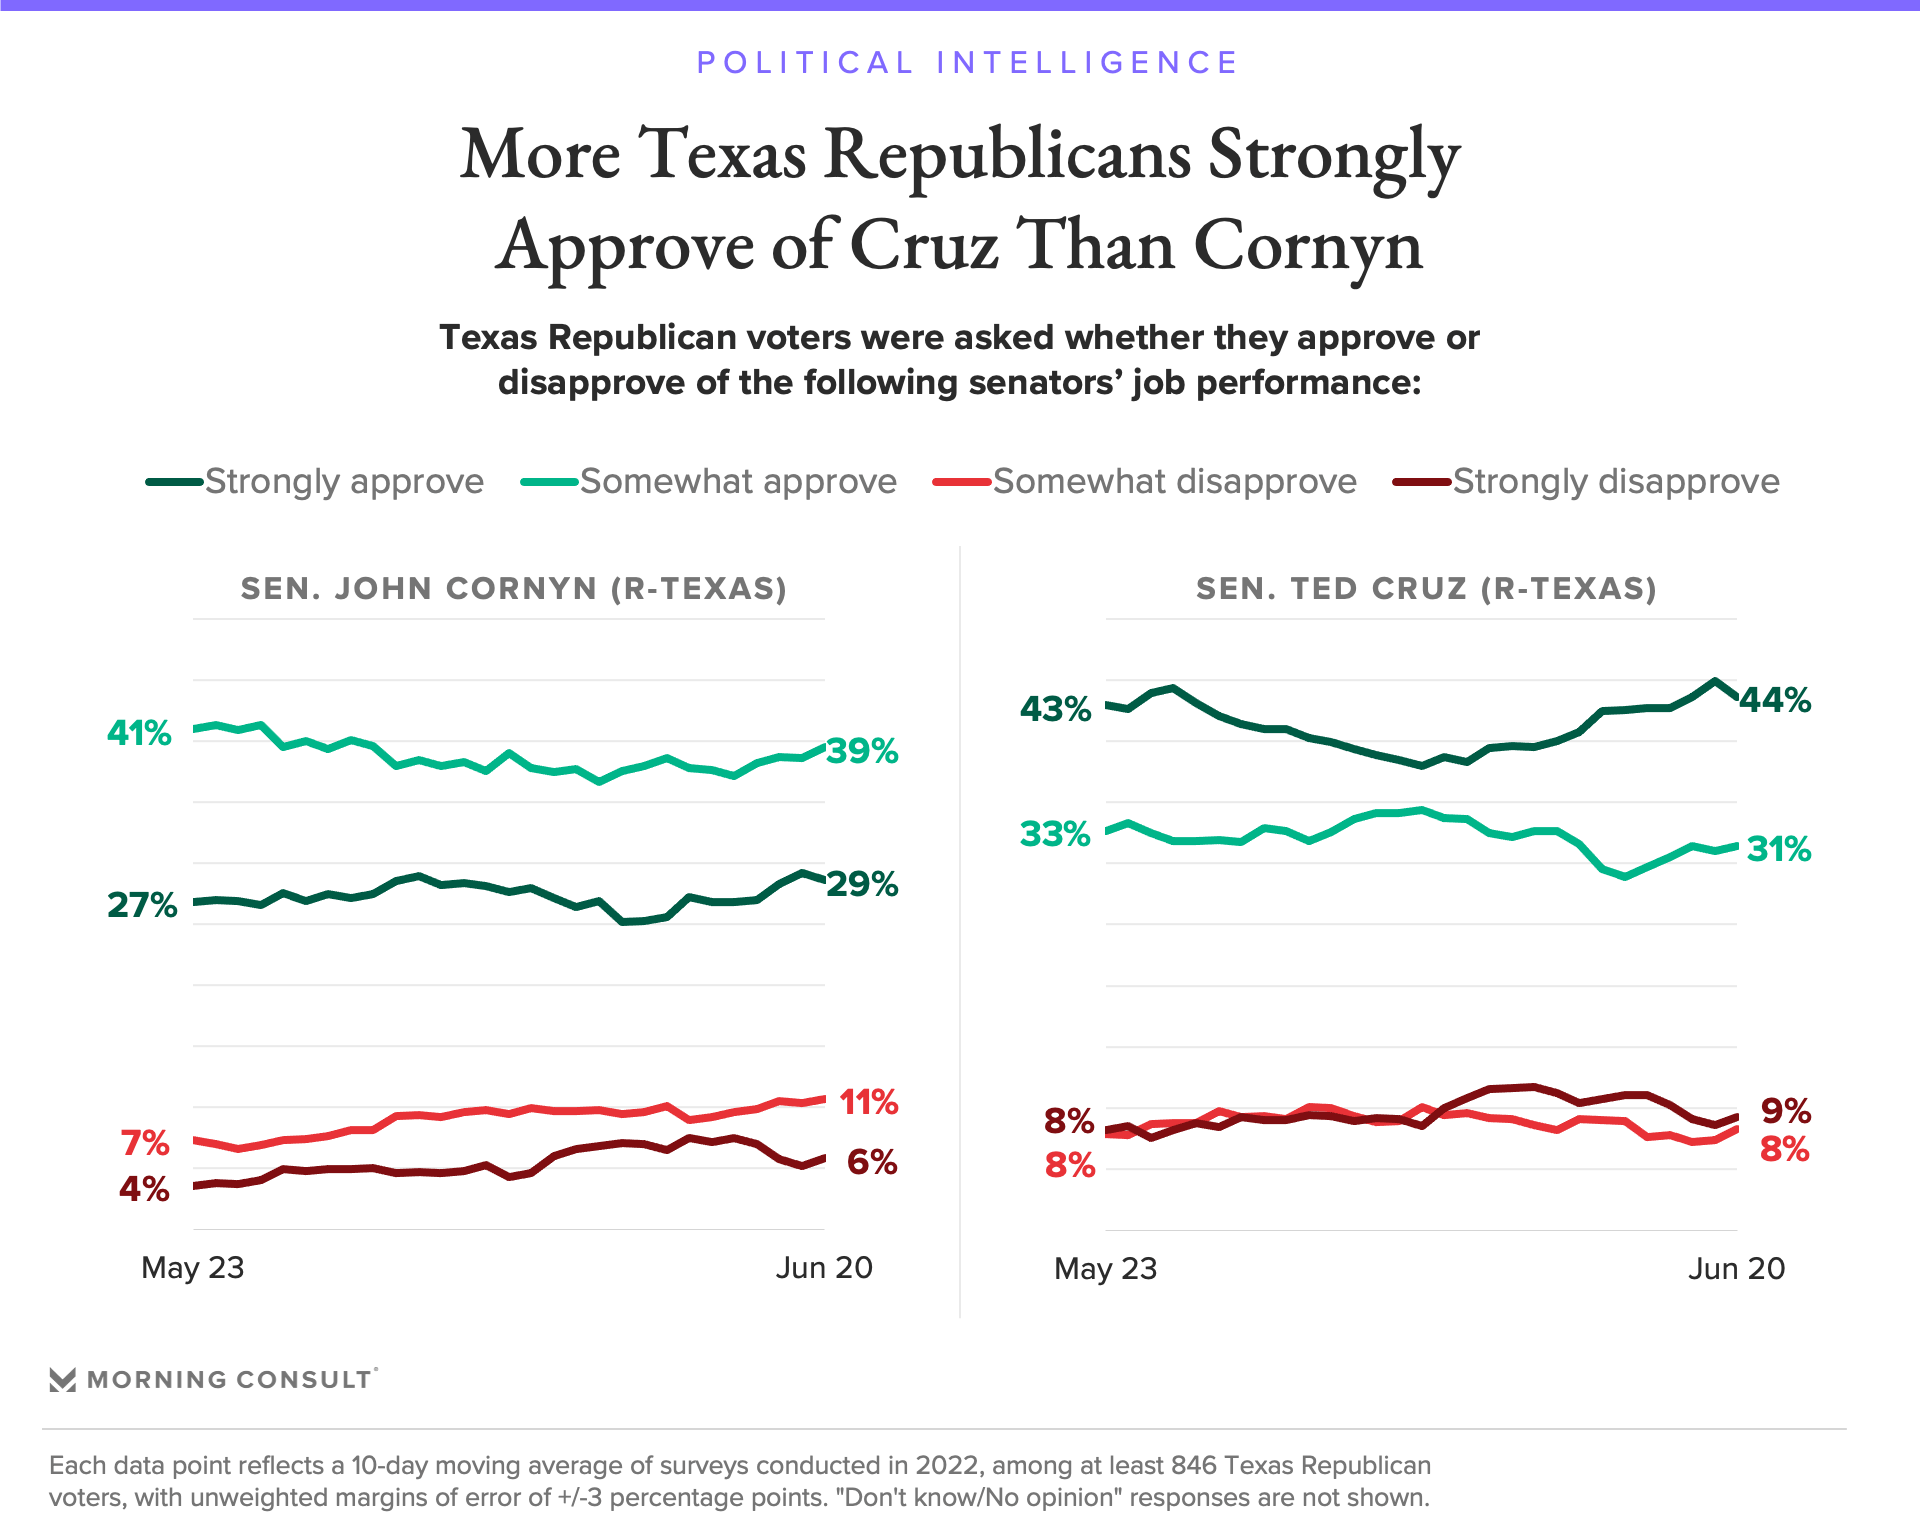 More Texans strongly approve of Cruz than Cornyn